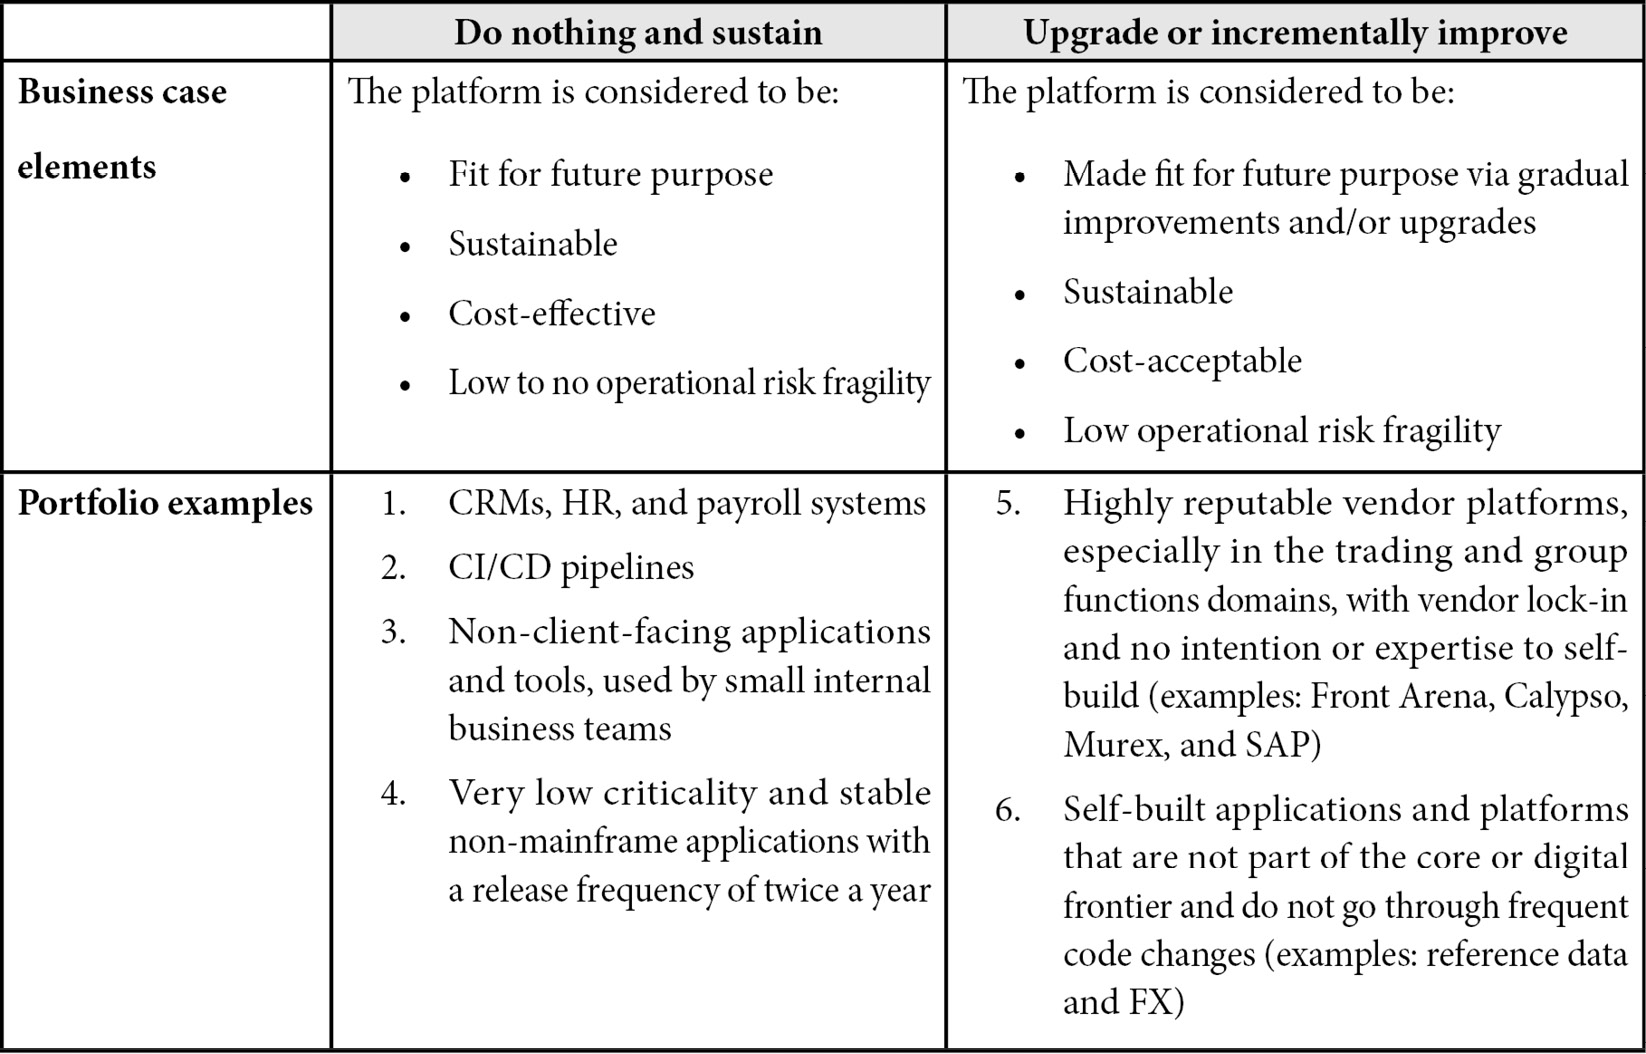 Table 4.1 – The “Do nothing and sustain” and “Upgrade or incrementally improve” approaches
